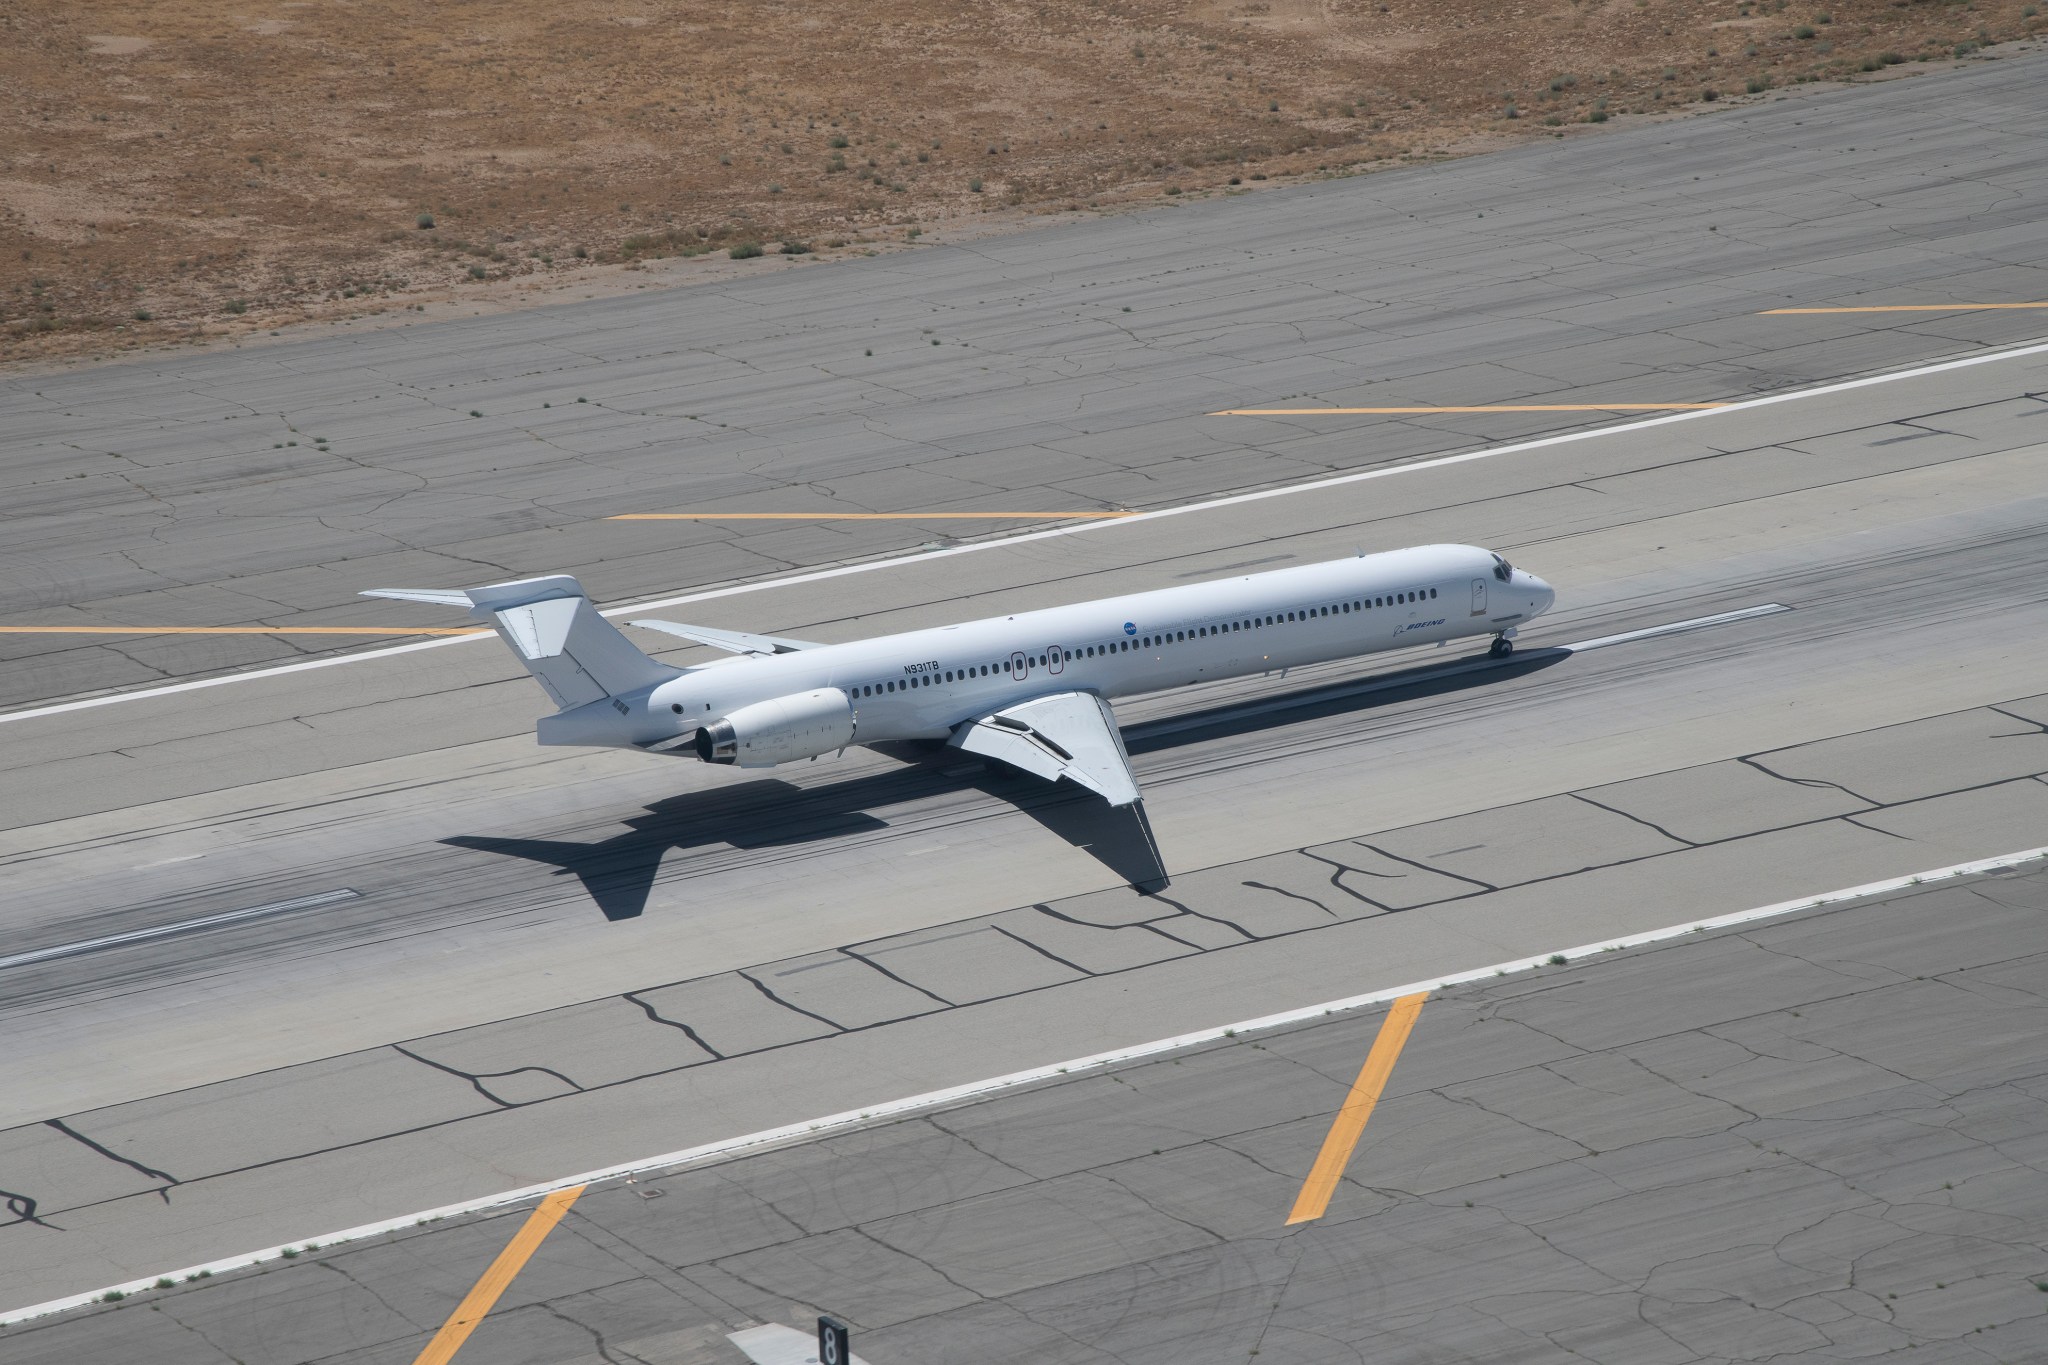 Boeing MD-90 on the runway.